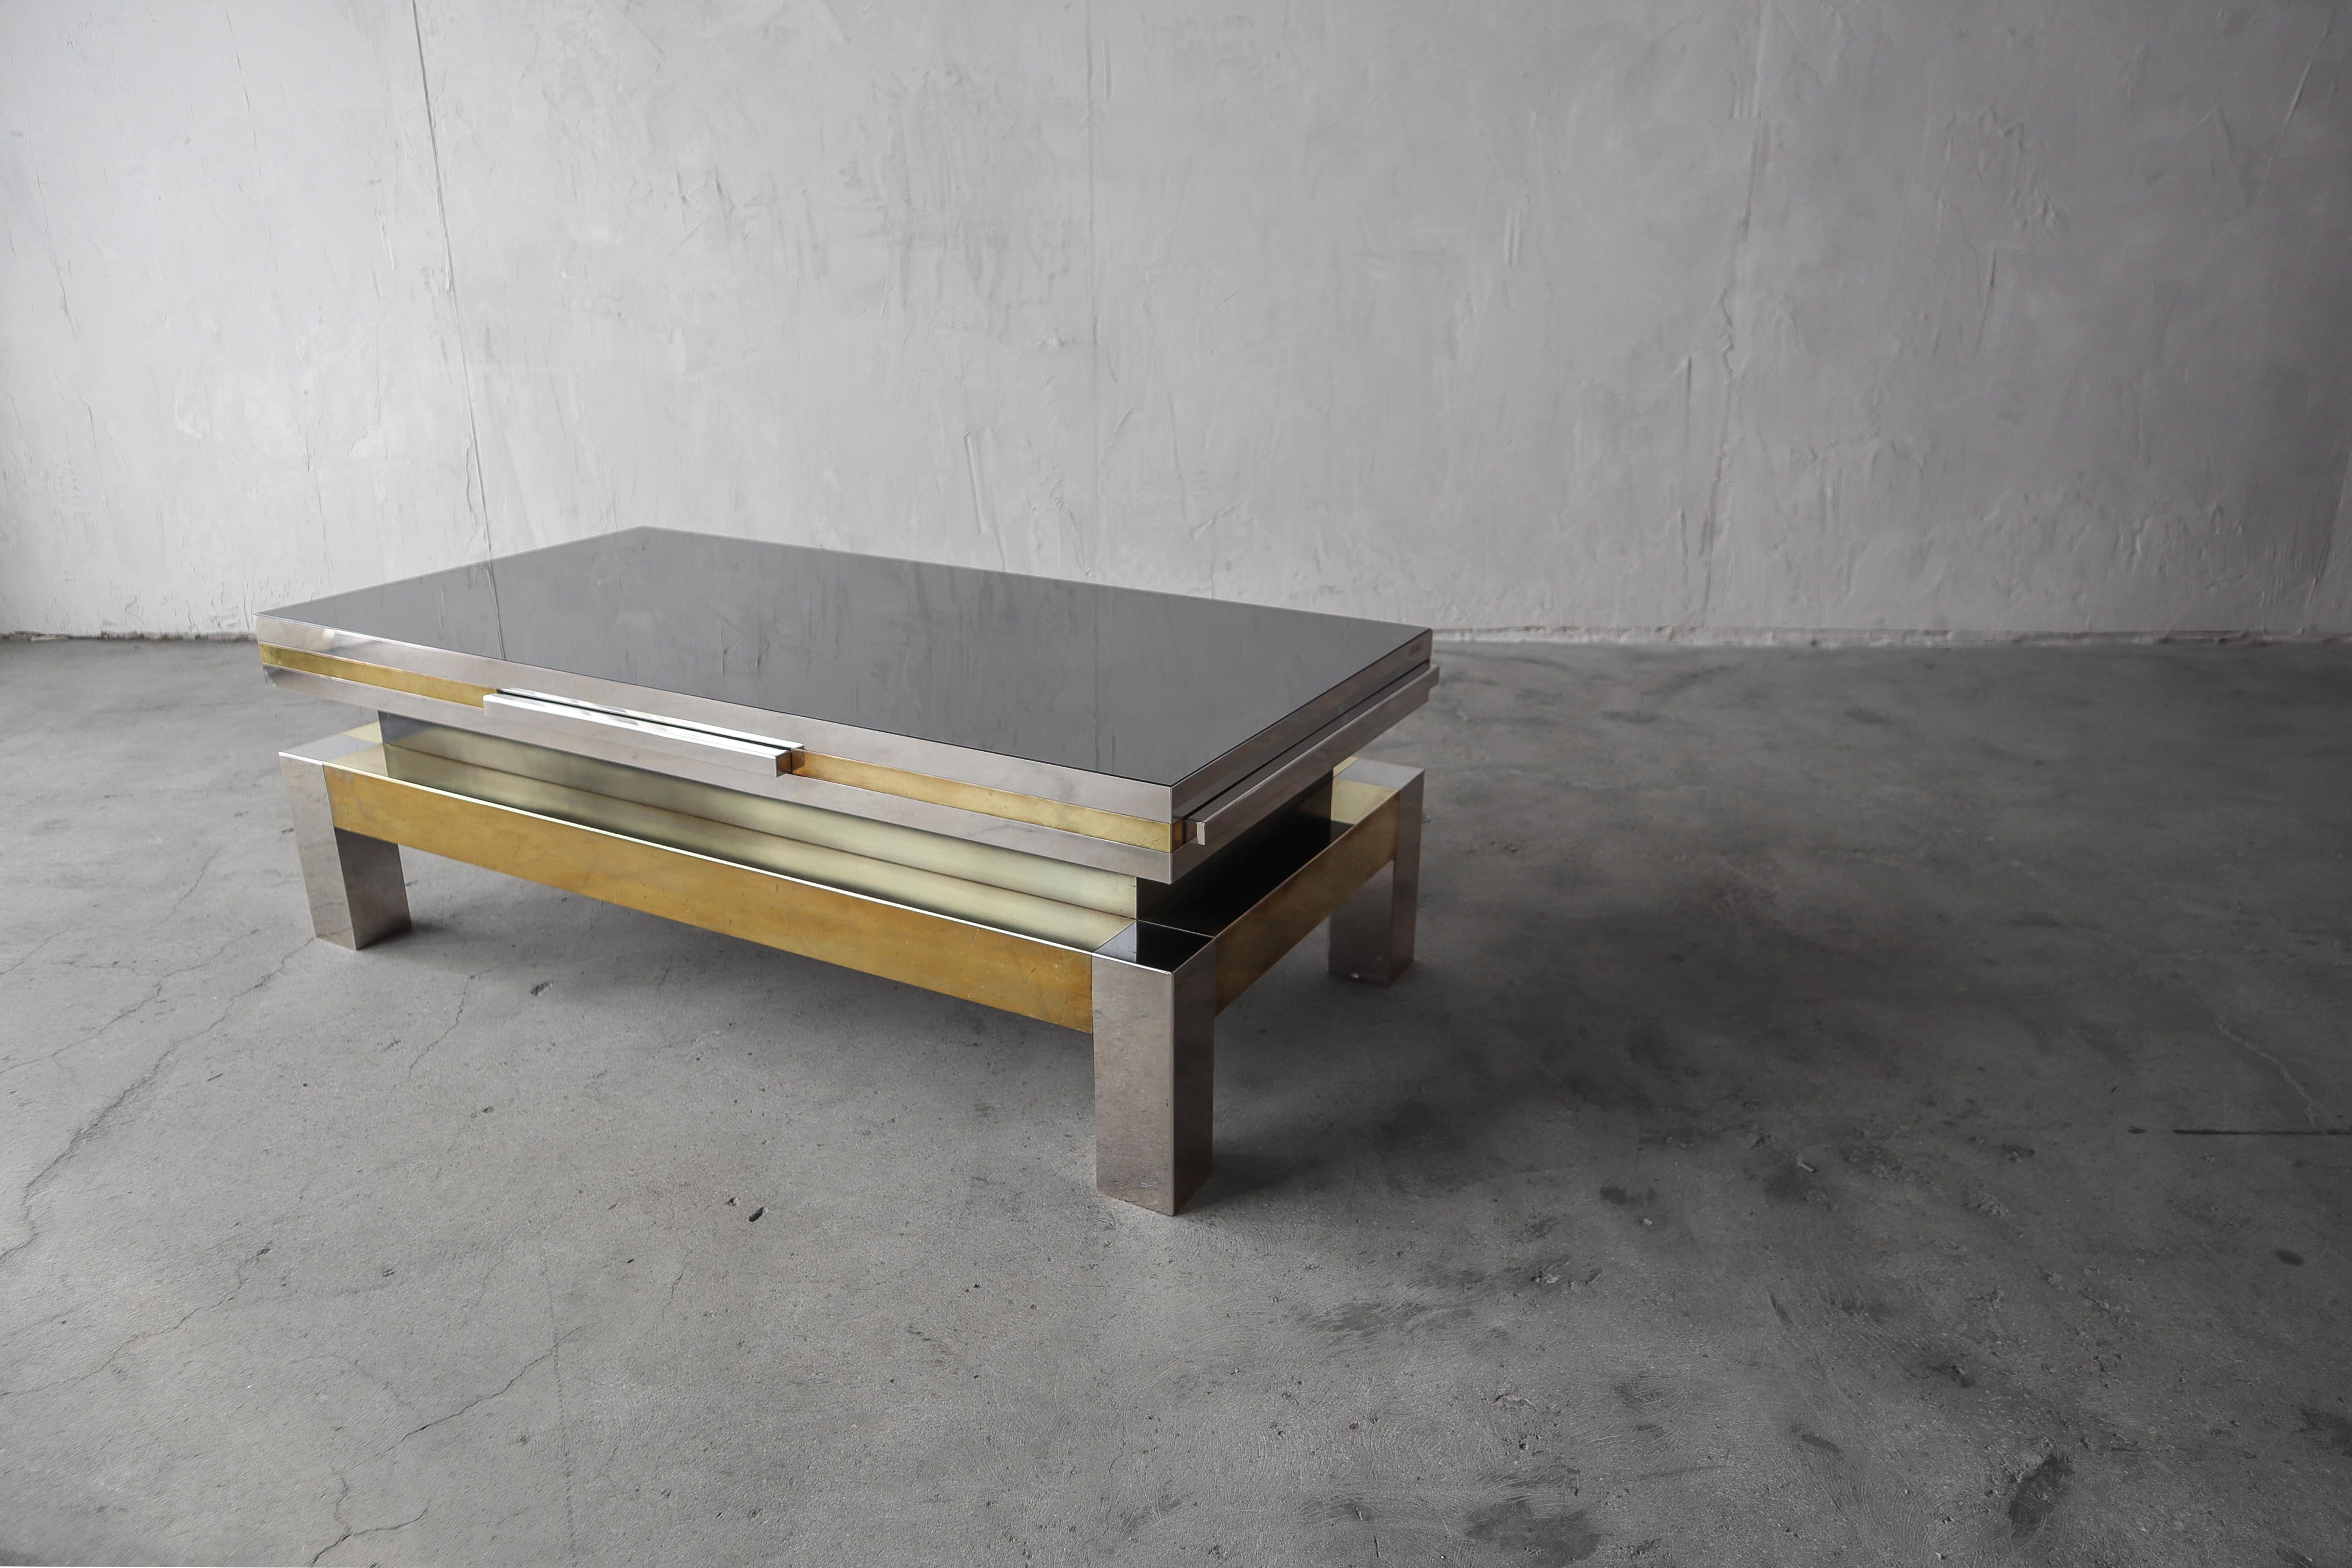 Rare Italian extension coffee table by Sando Petti. constructed out of chrome, brass and black glass this table is a stunning, unique piece, a true conversation table. Each side features a chrome pull out that widens and lengthens the table by